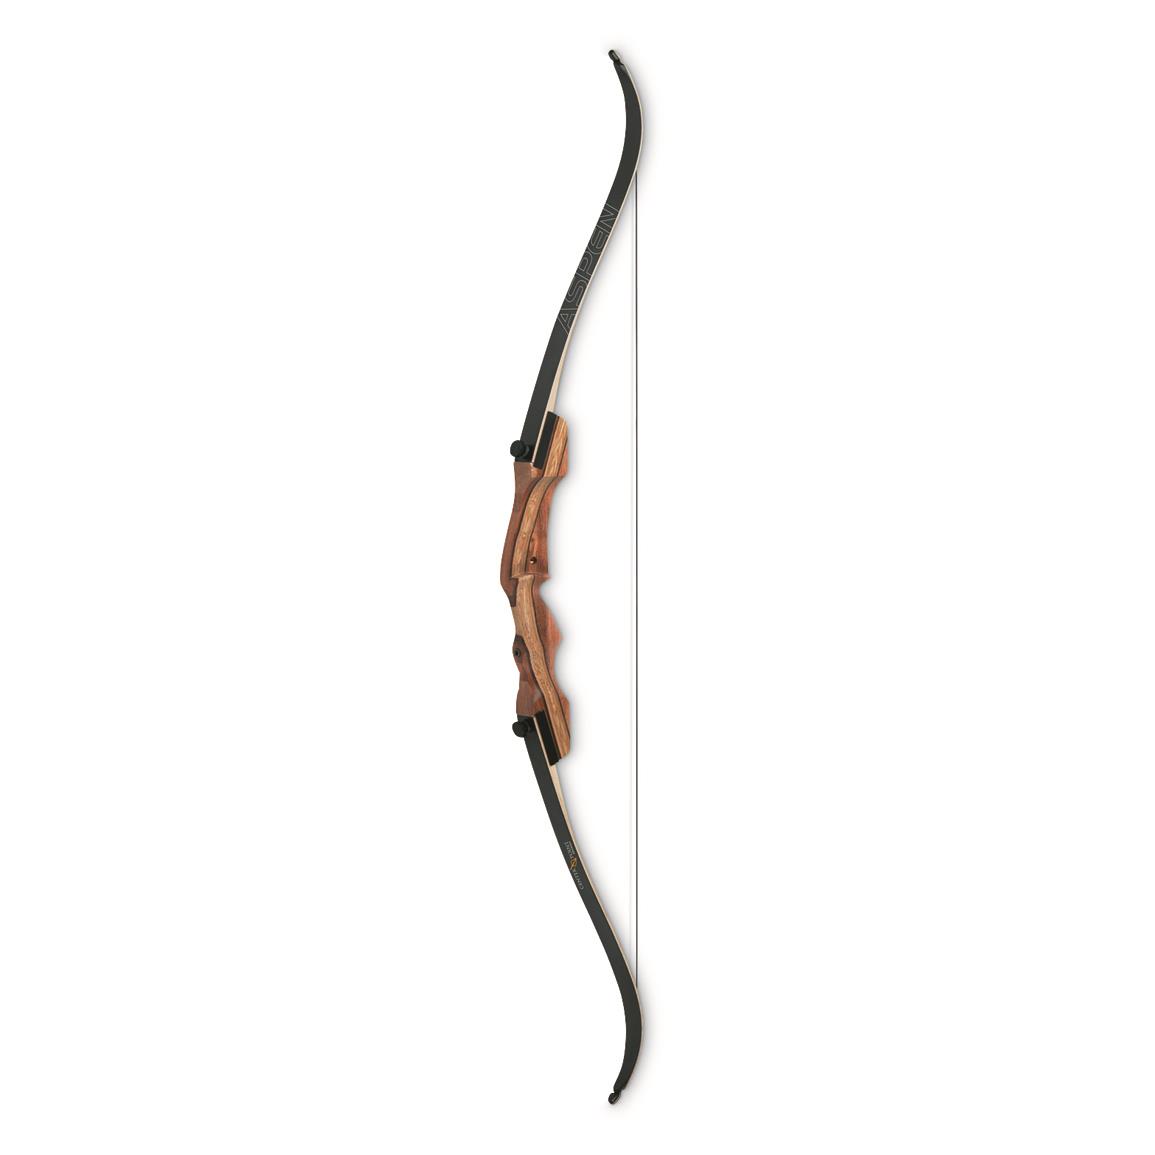 Details about   CenterPoint Aspen Takedown Recurve Bow Package 